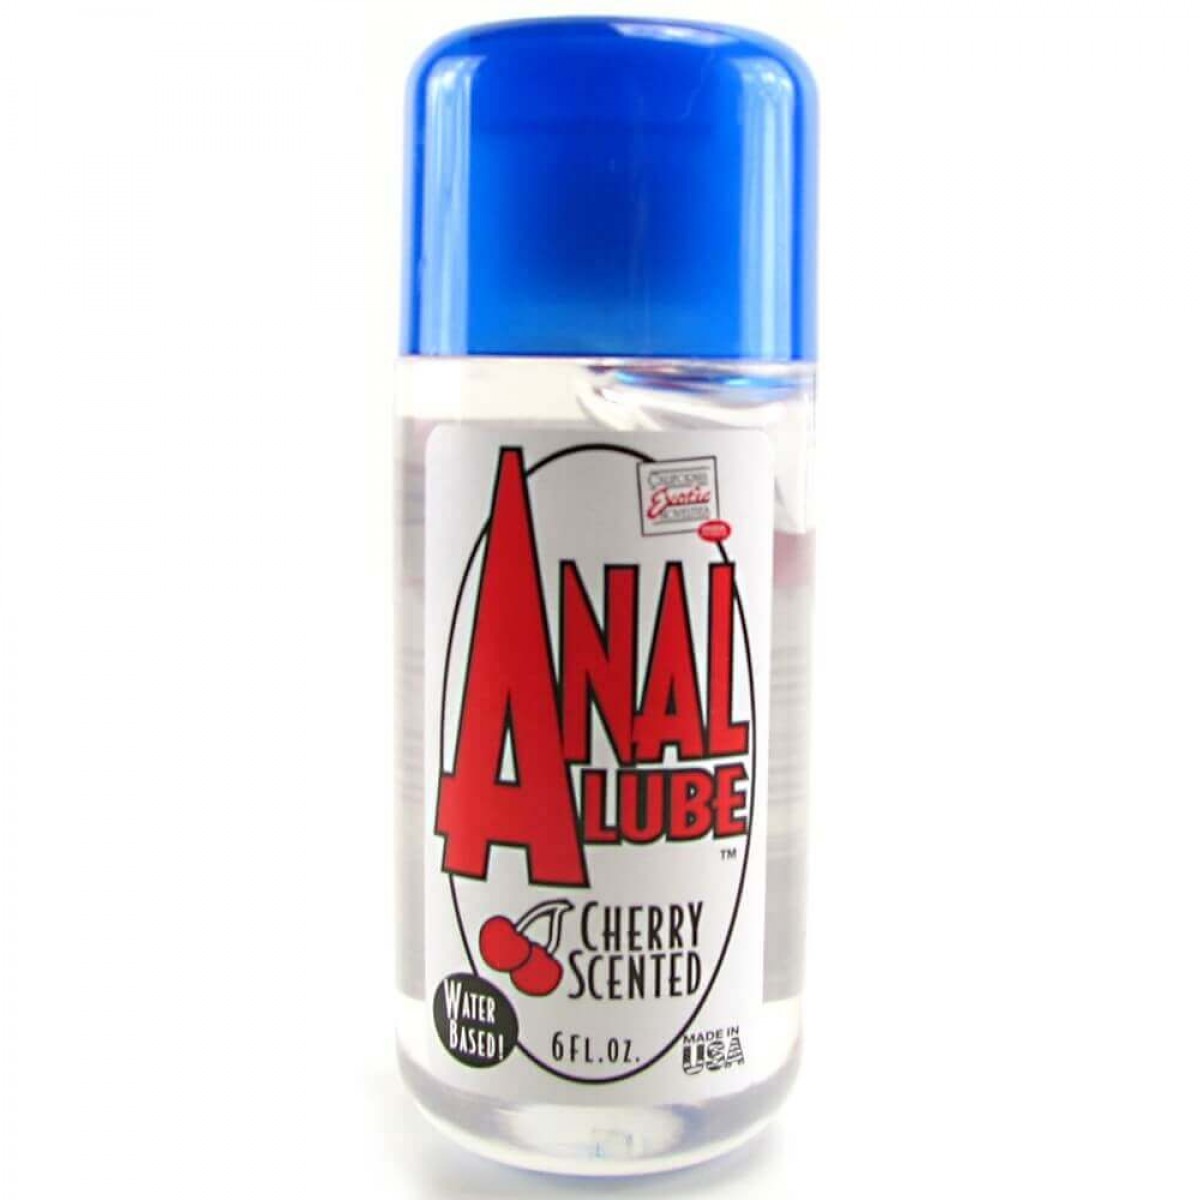 Anal Lube In Cherry Scented Toronto Sex Toys 1hr